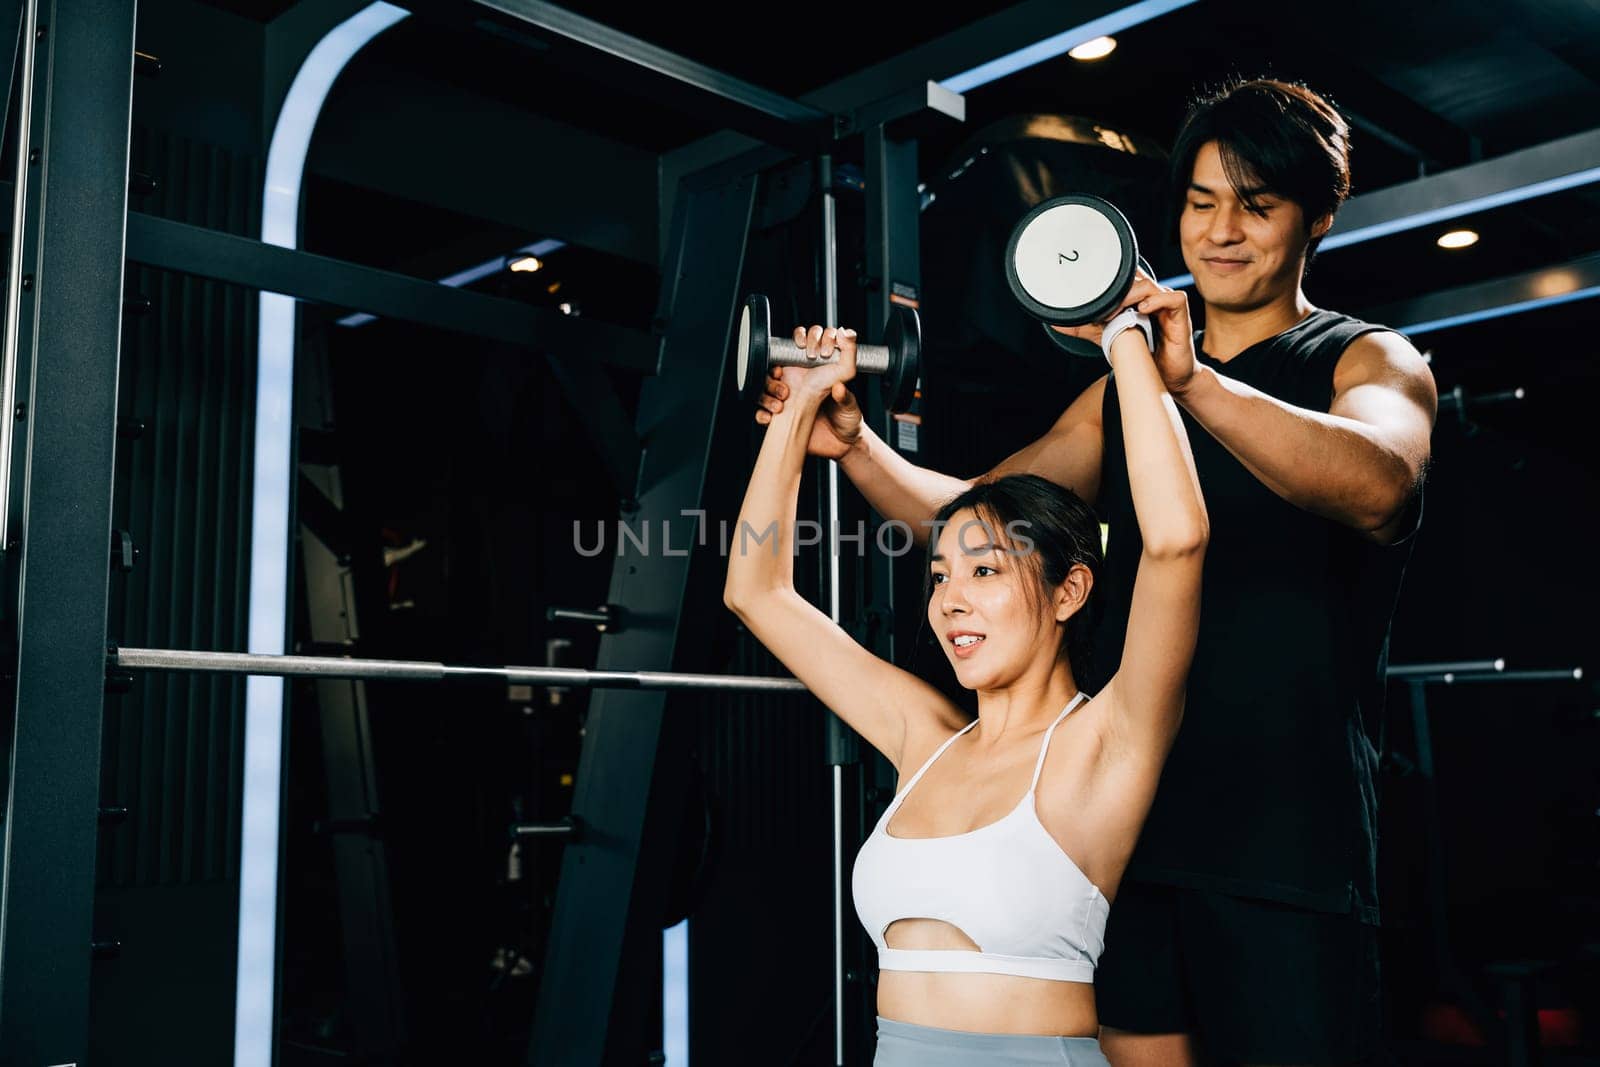 Fit Asian woman with a muscular and toned arm lifting weights in the gym, motivated by her personal trainer's guidance and support and help, technique of exercise in gym dark gym background